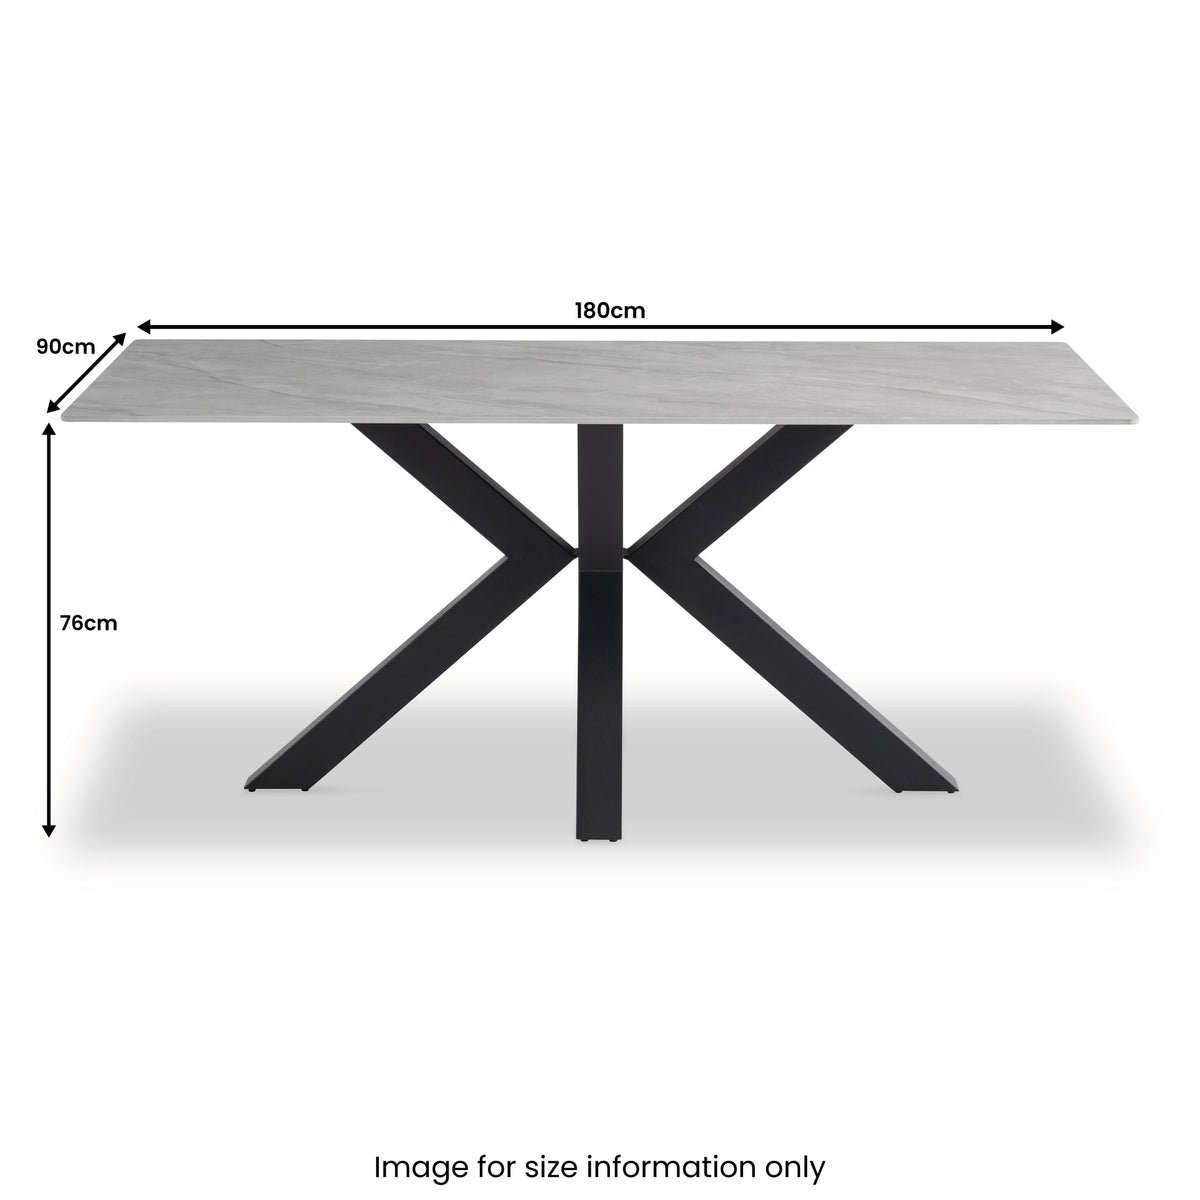 Earlsdon White & Gold Sintered Stone 180cm Dining Table for dining room